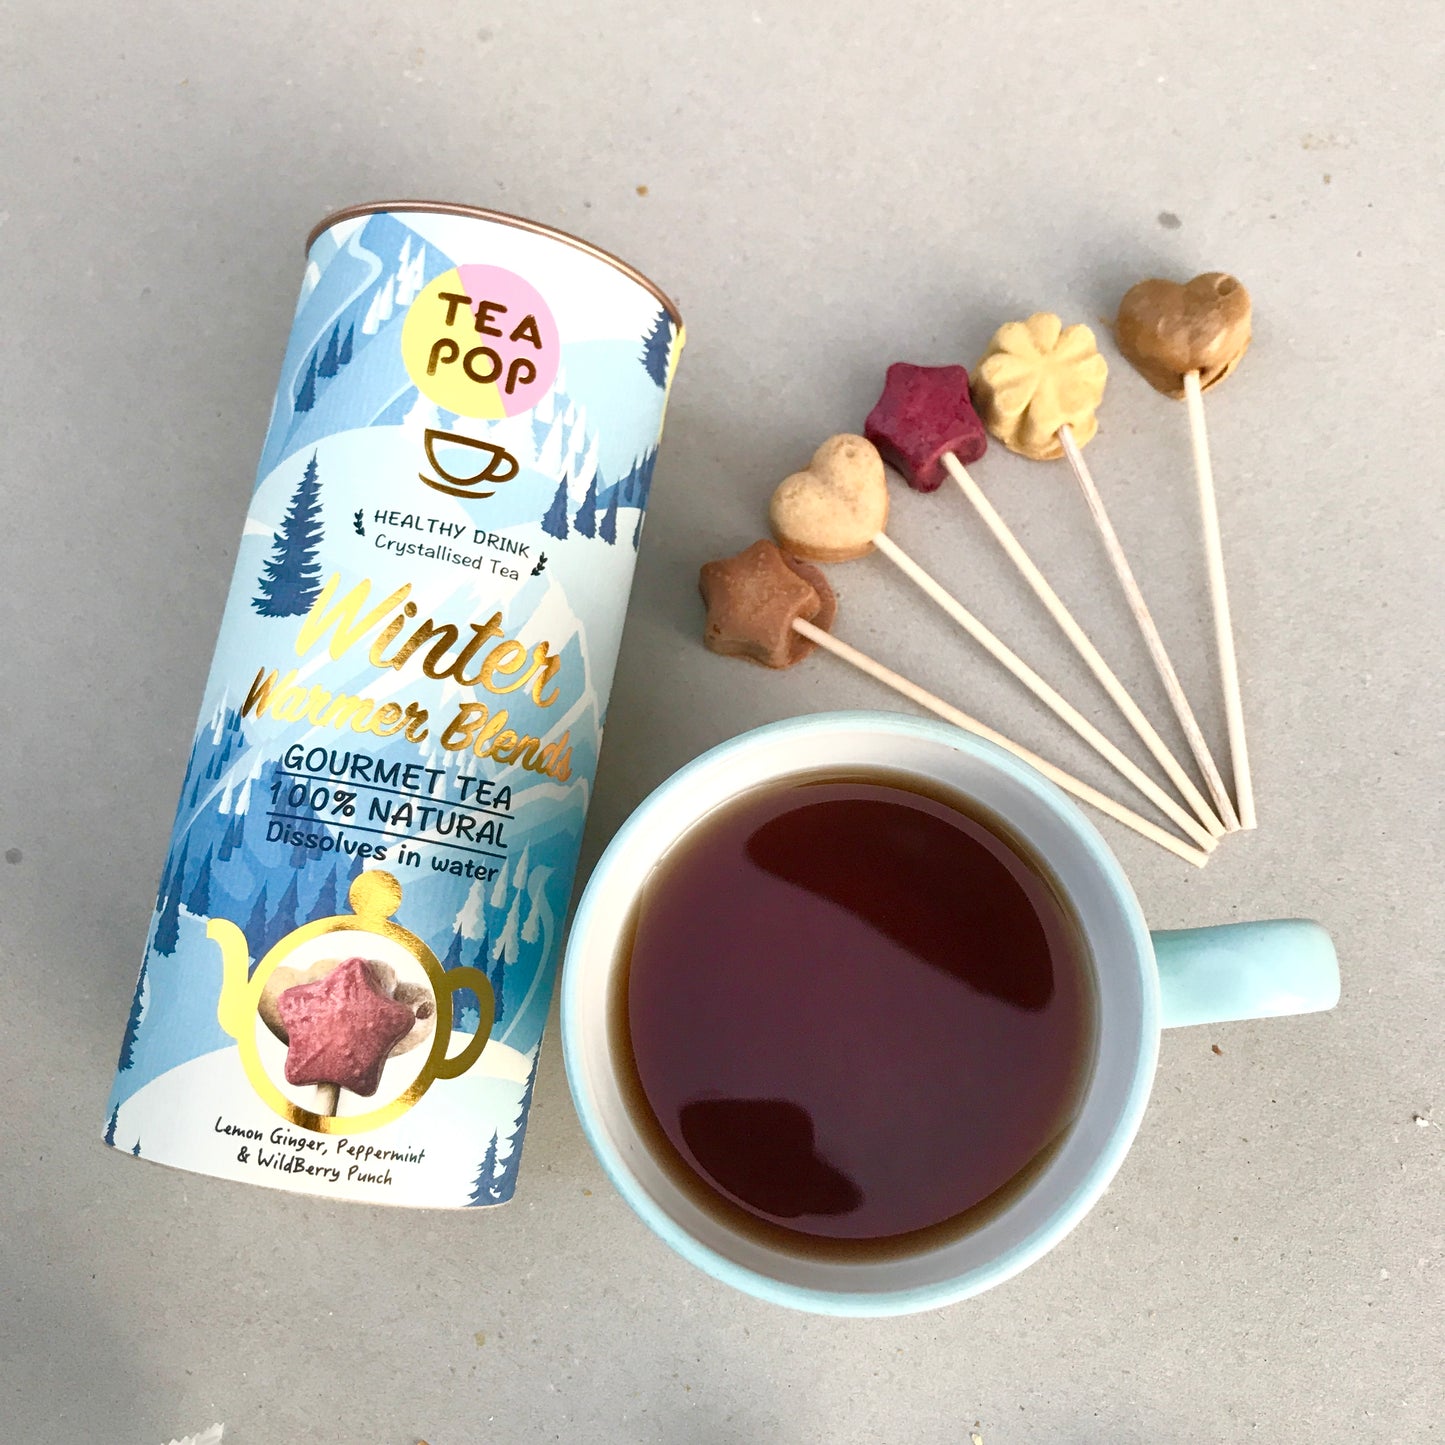 Tea on a stick, gourment tea gift set, 3 best sellers in one pack